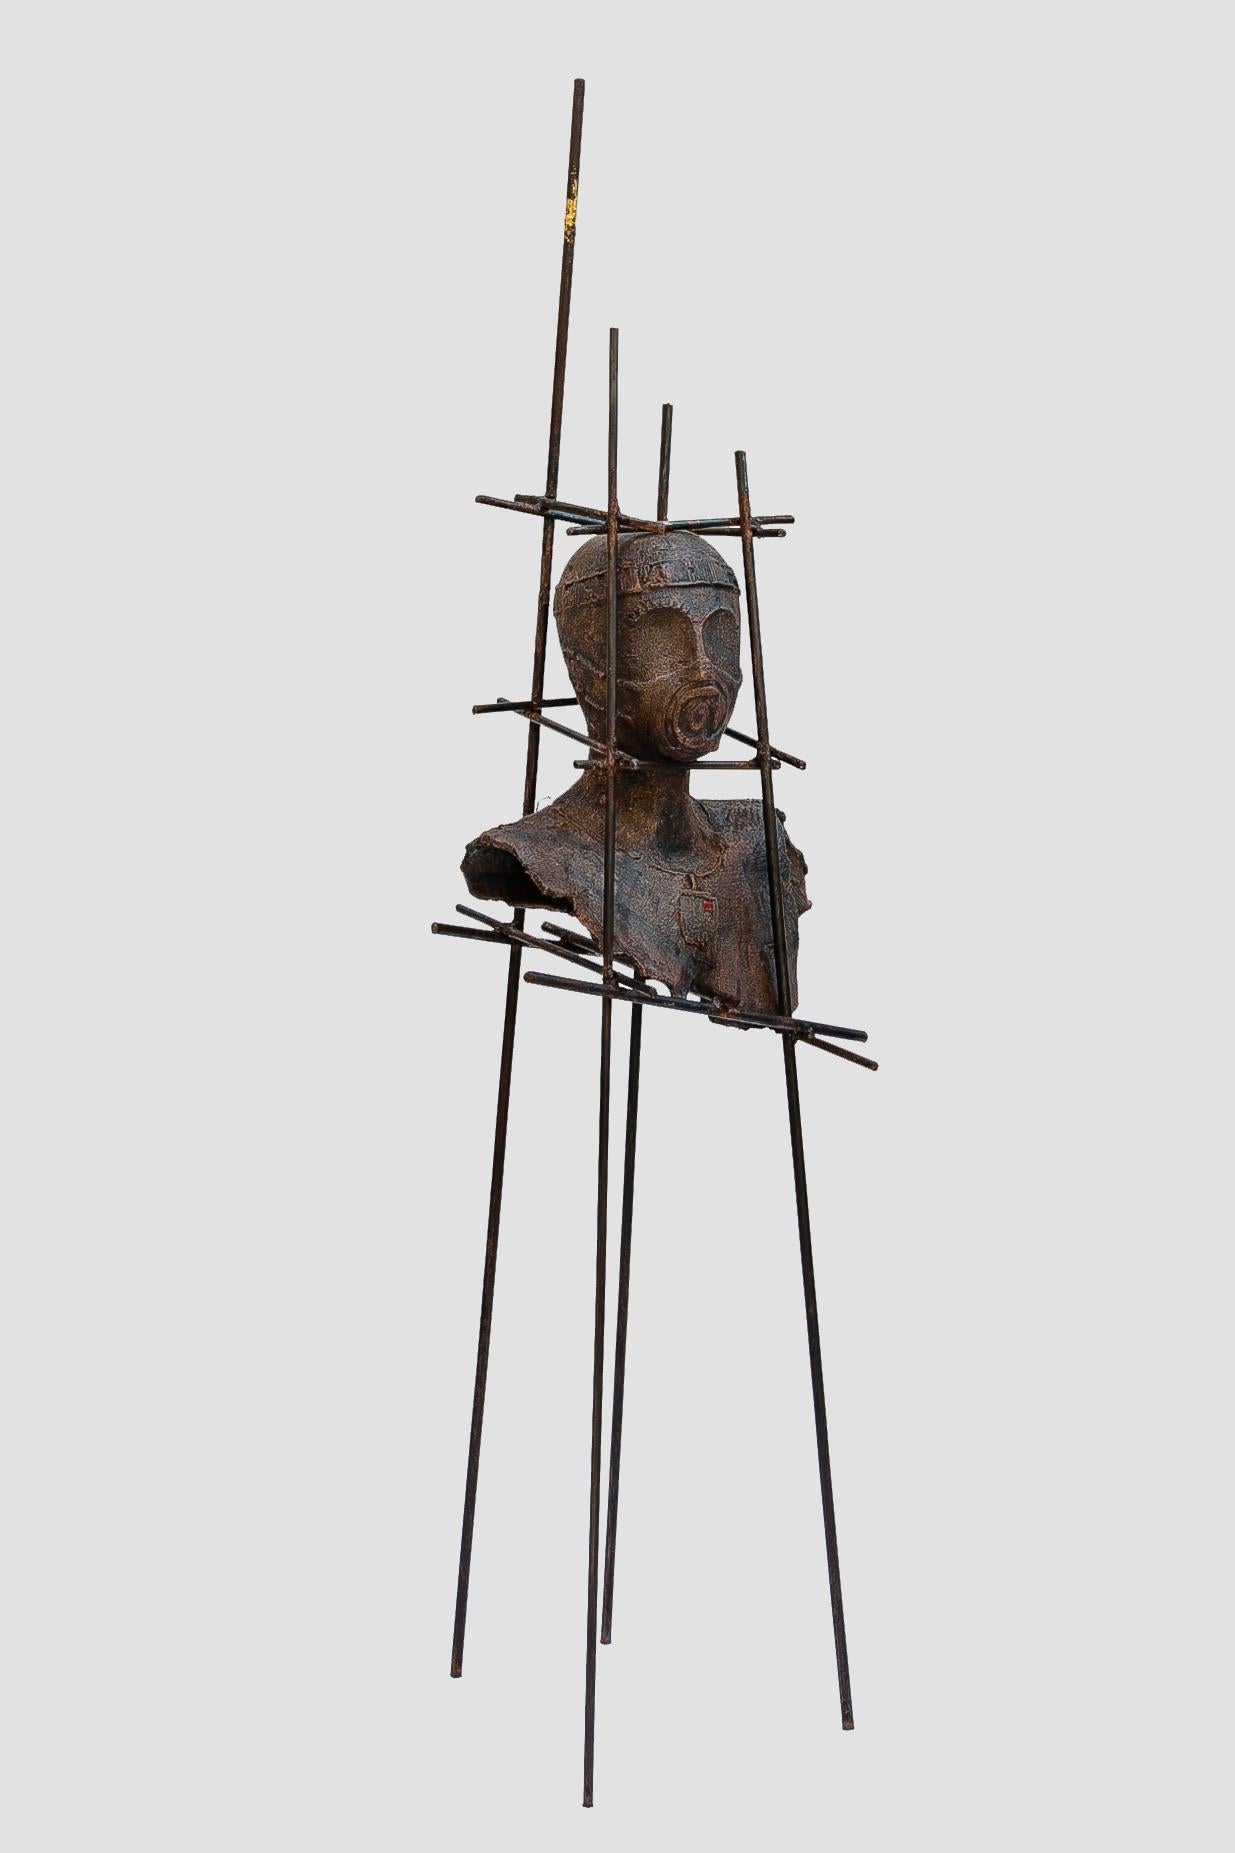 TESTA @ - DISTOPICA POST INDUSTRIALE
2021
Ceramic, iron and gold leaf
Measurement: CM  40x38x137
Weight: 8 kg


These are figurative works, of classical or archaic inspiration, reinterpreted using strictly contemporary signs and communicative